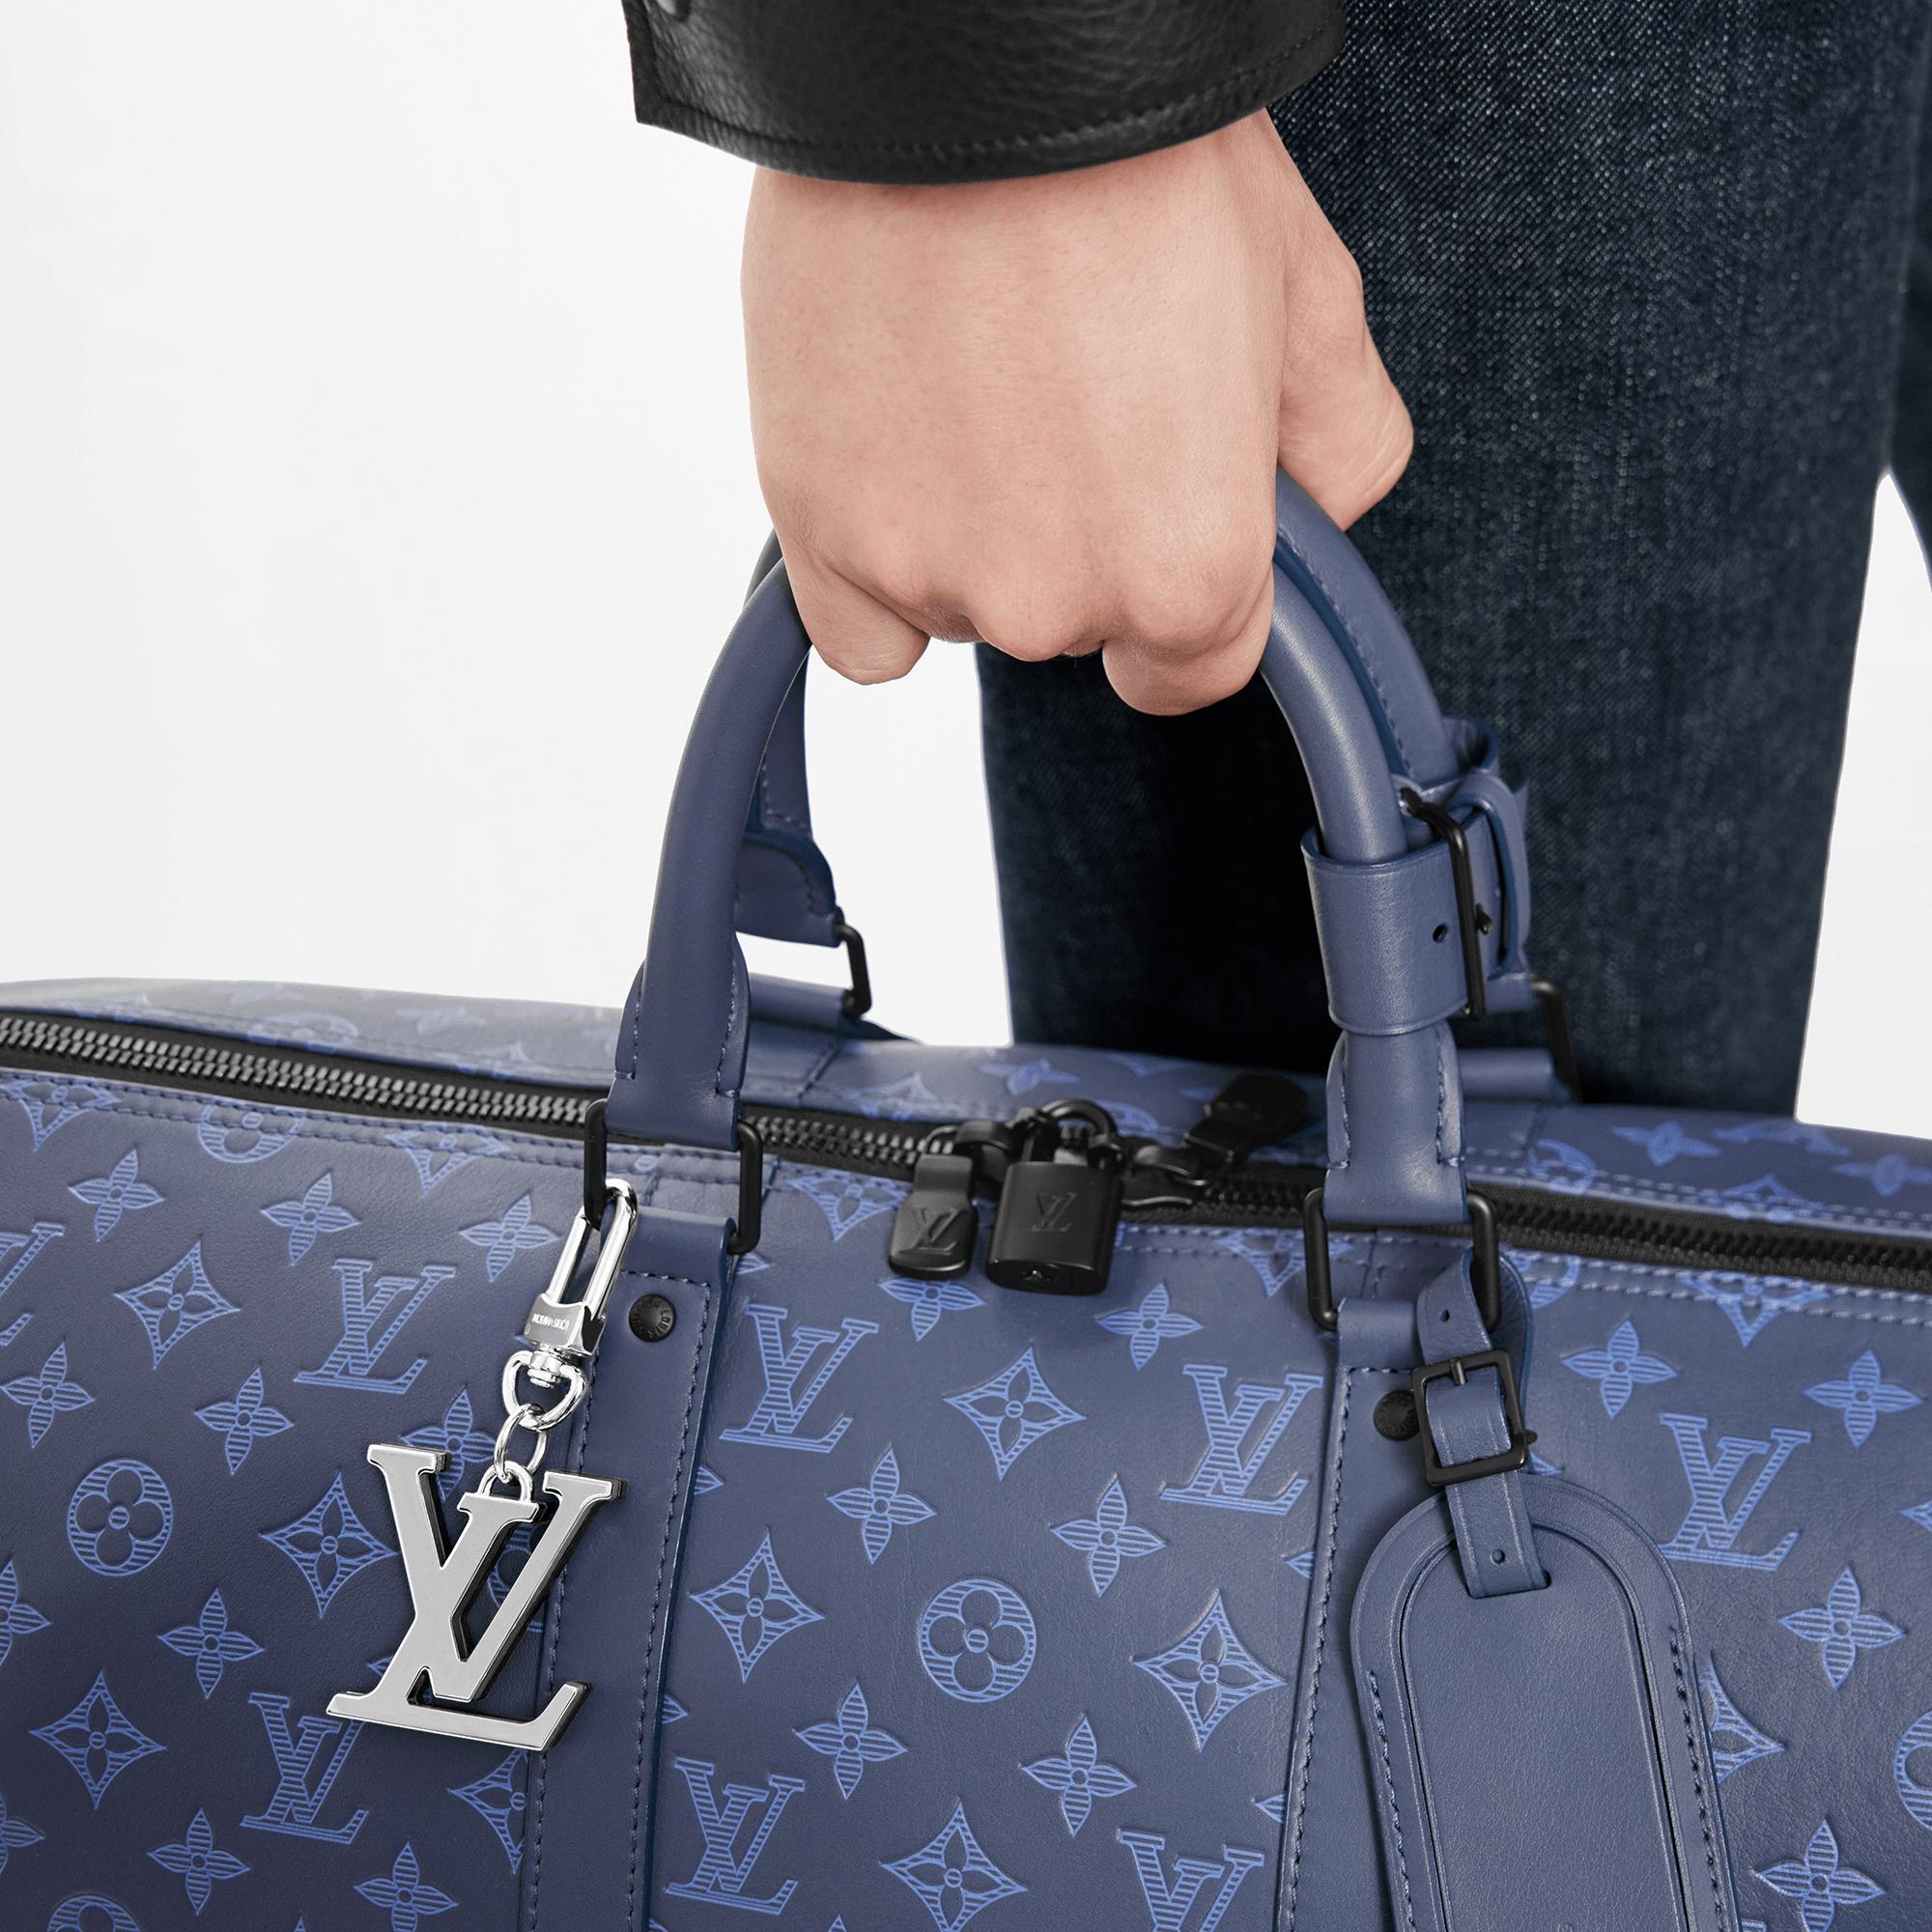 LV Initials Key Holder And Bag Charm S00 - Men - Accessories